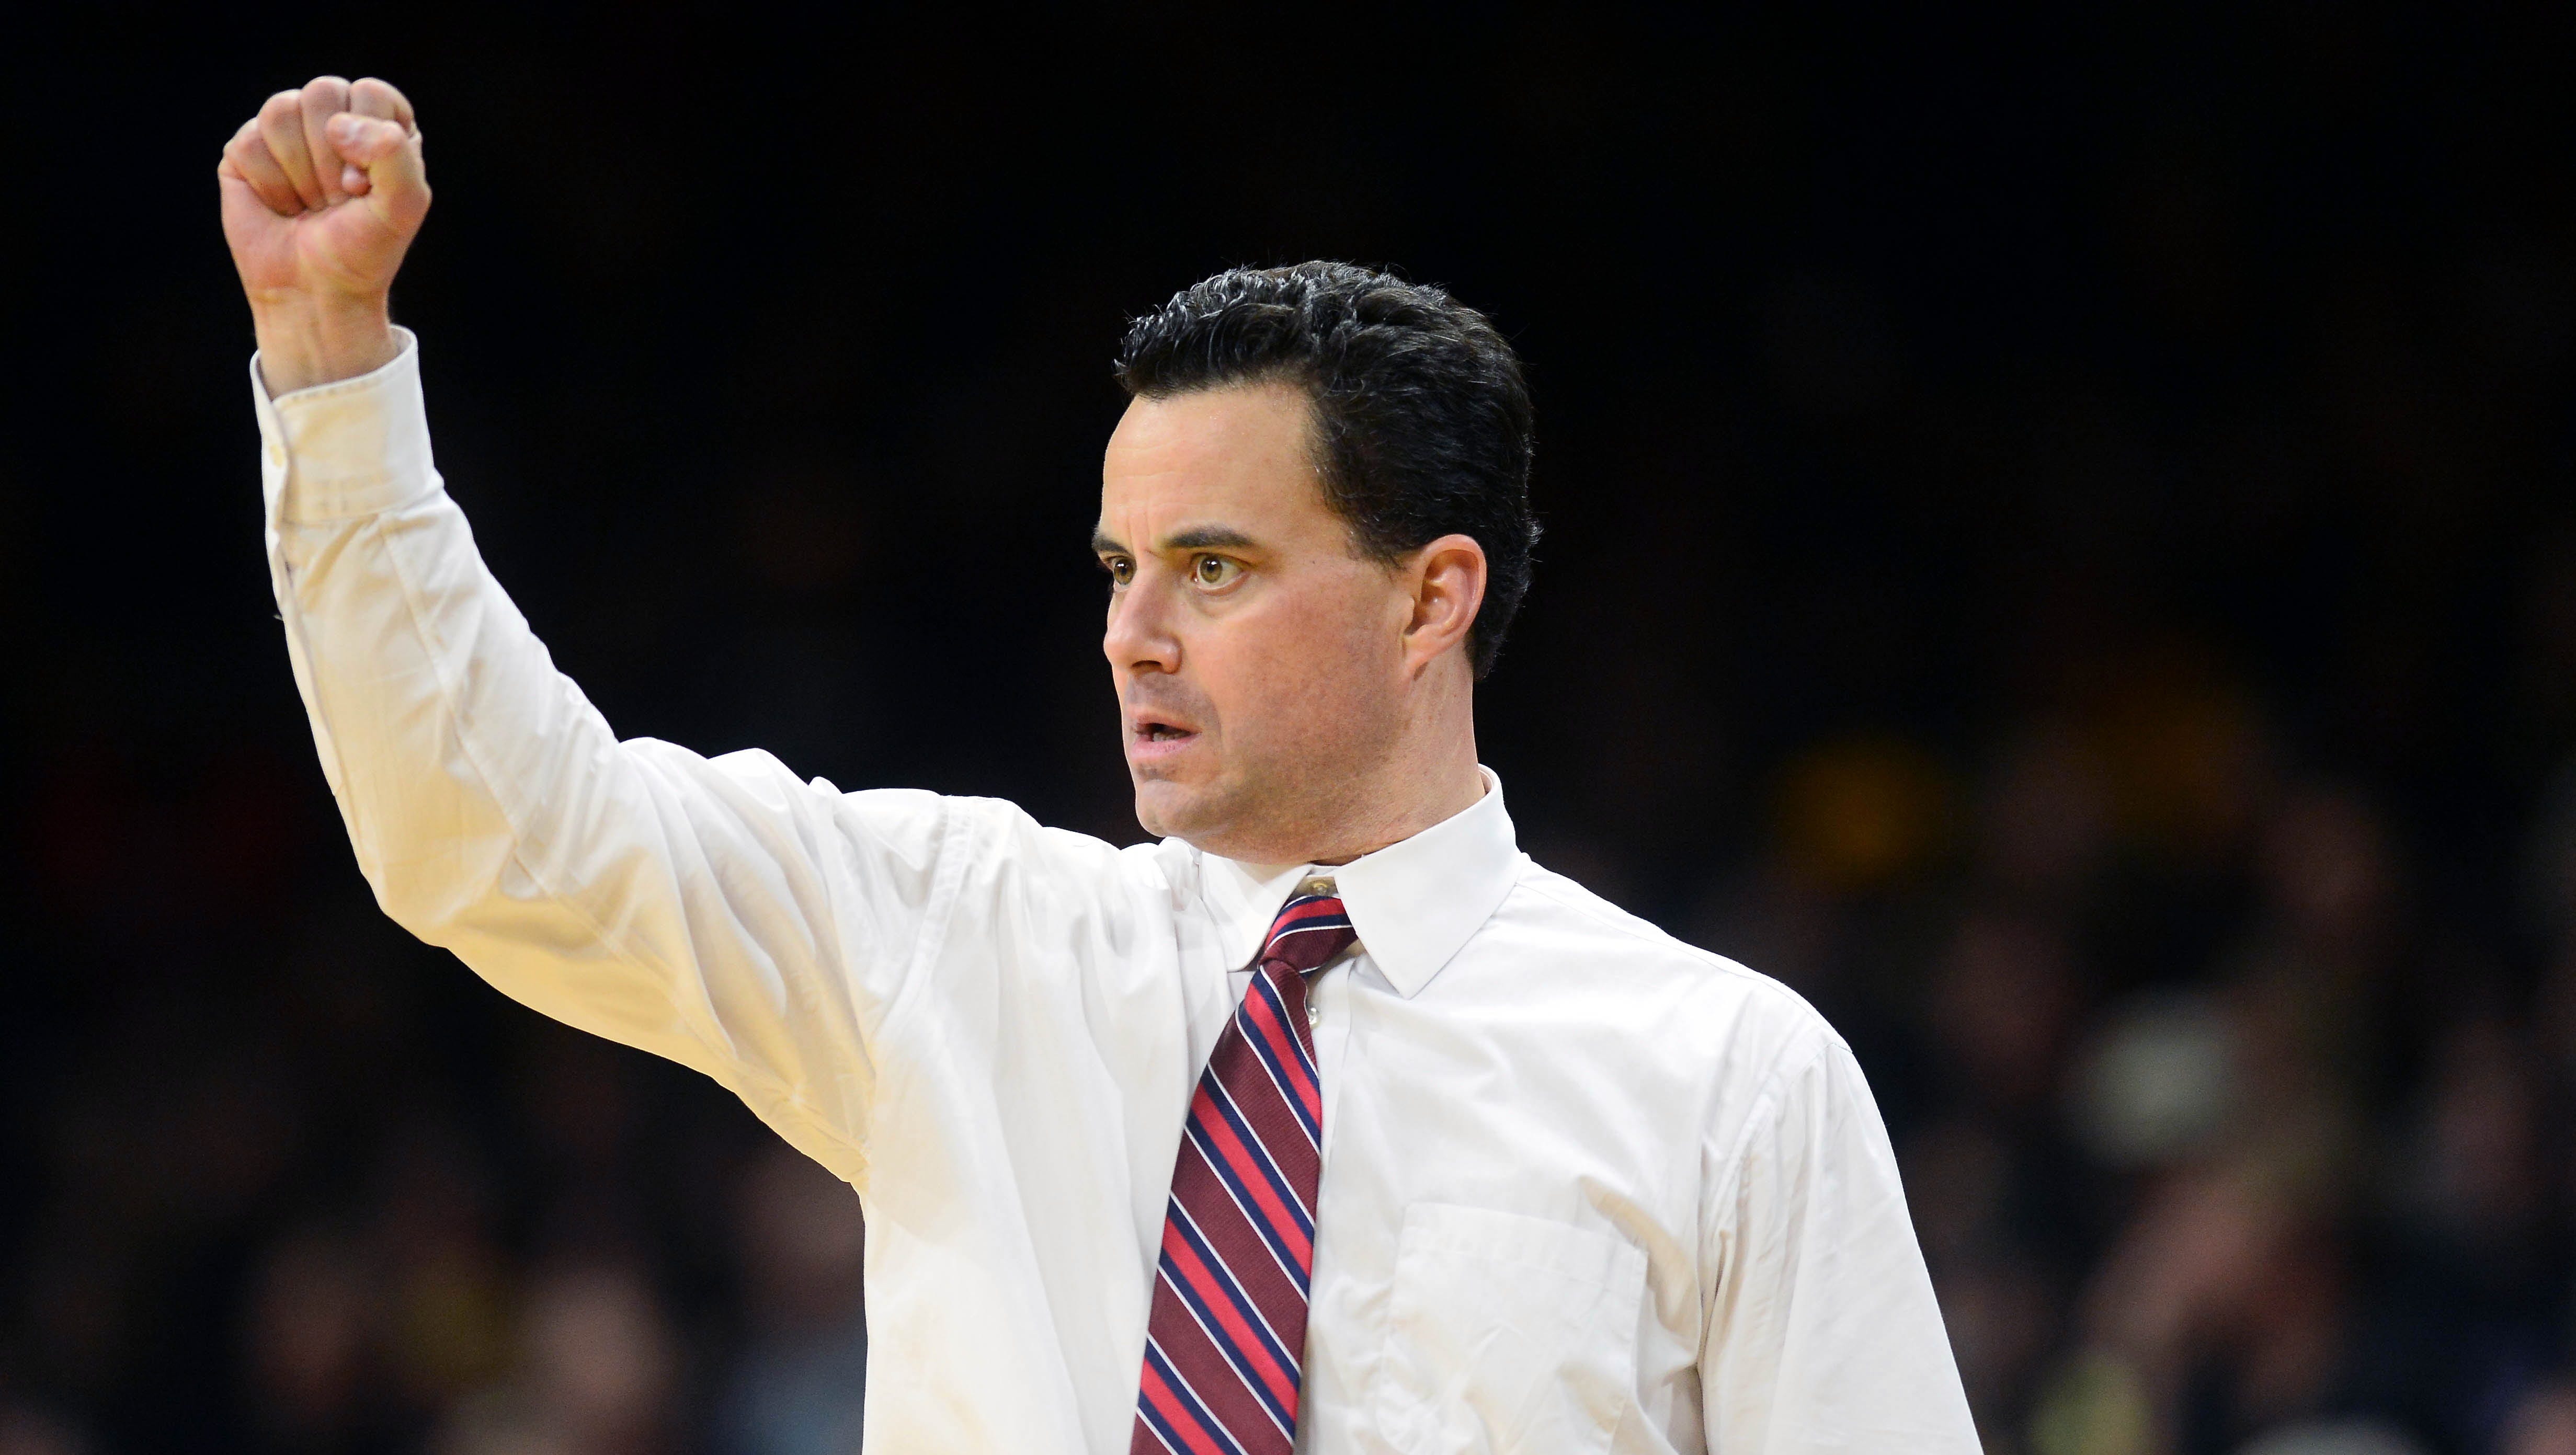 Sean Miller, Arizona have a point about court storming